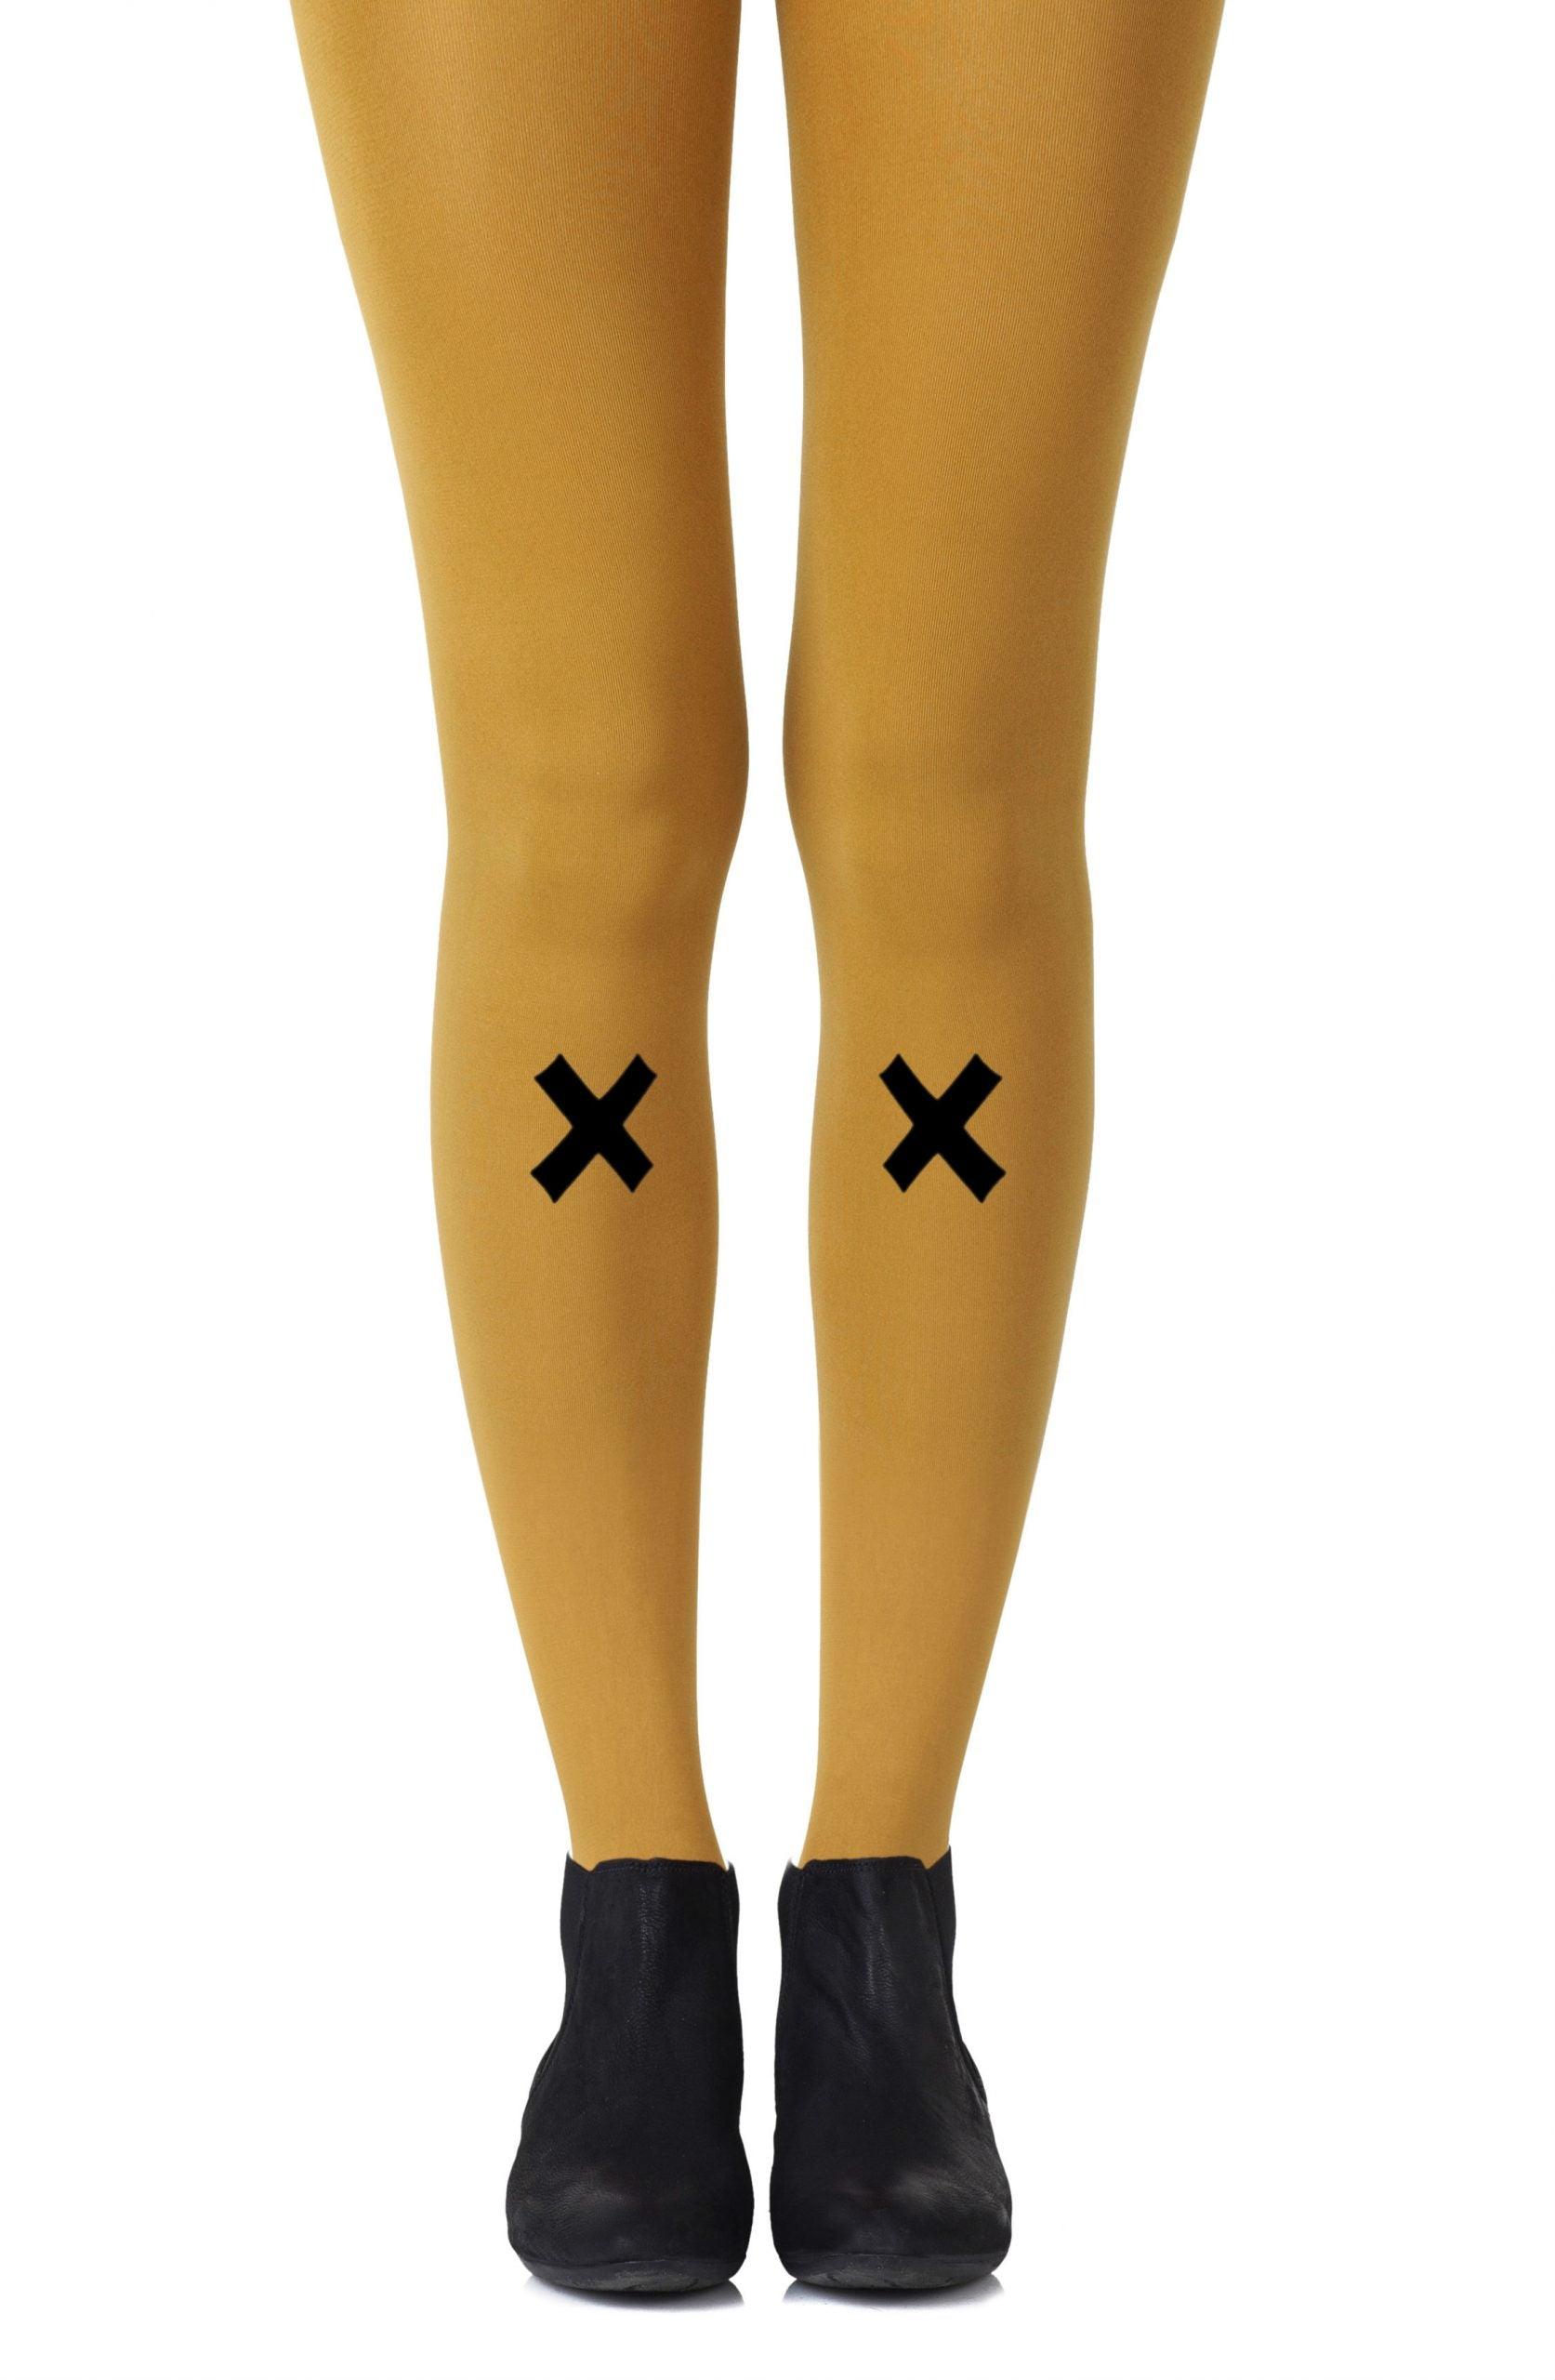 Zohara "Kiss and Tell" Mustard Print Tights - Sydney Rose Lingerie 